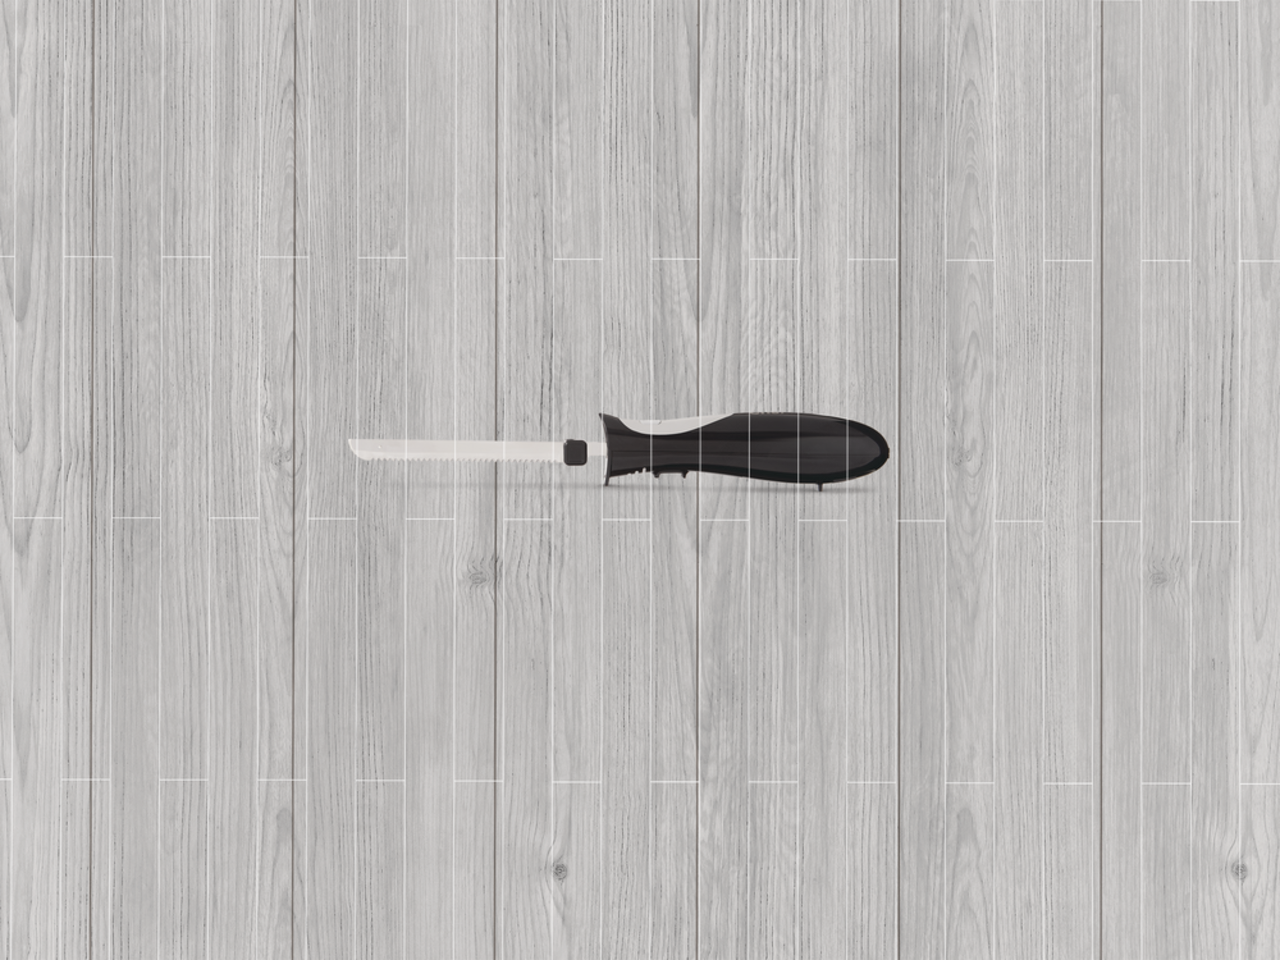 Electric Craft Knife